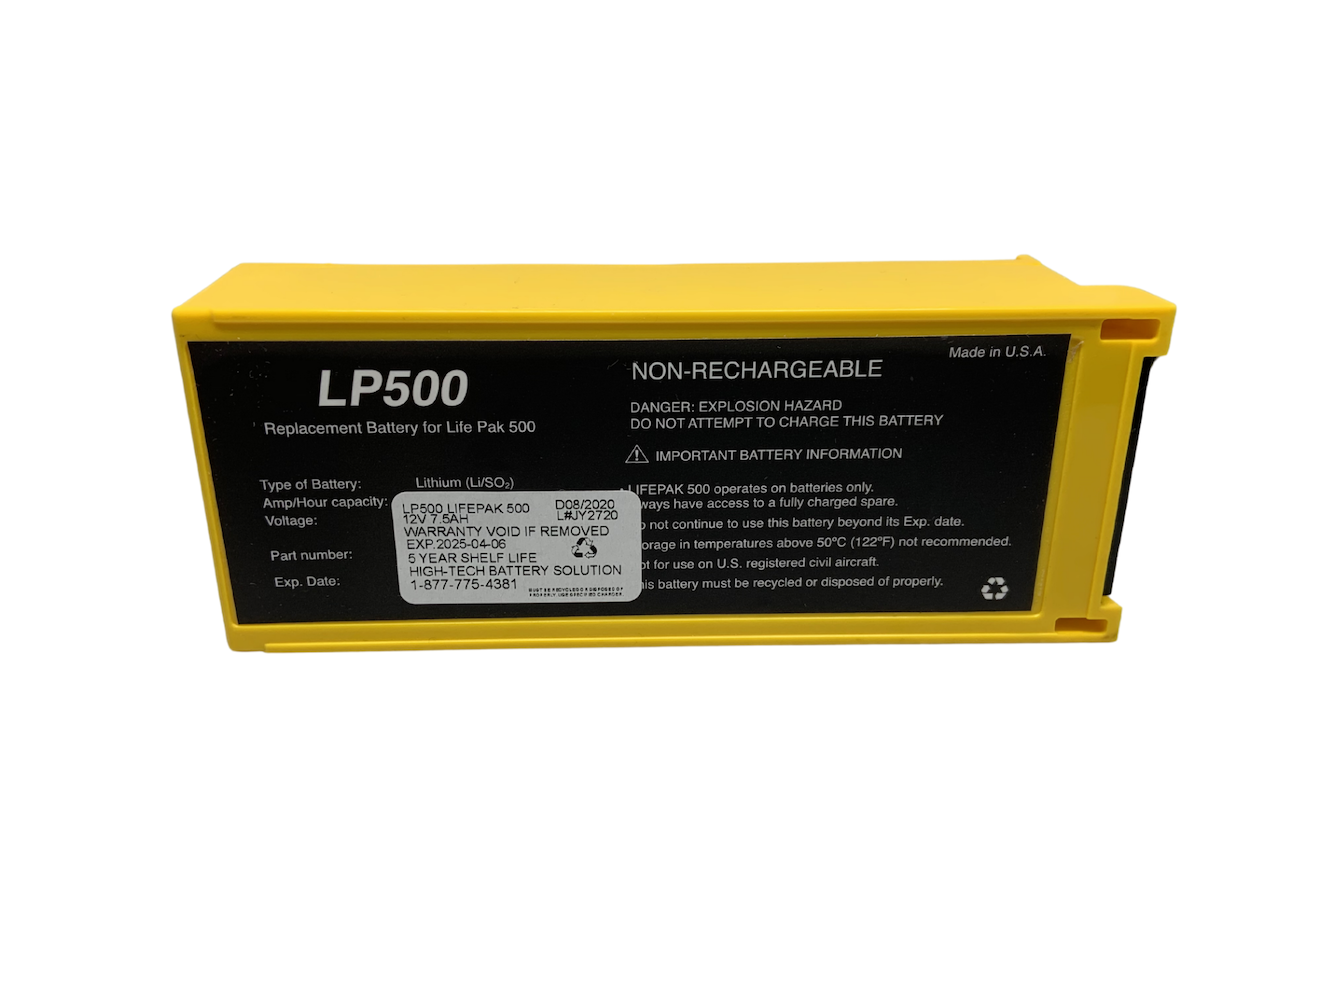 what is the expiration date of LifePak 500 Battery?